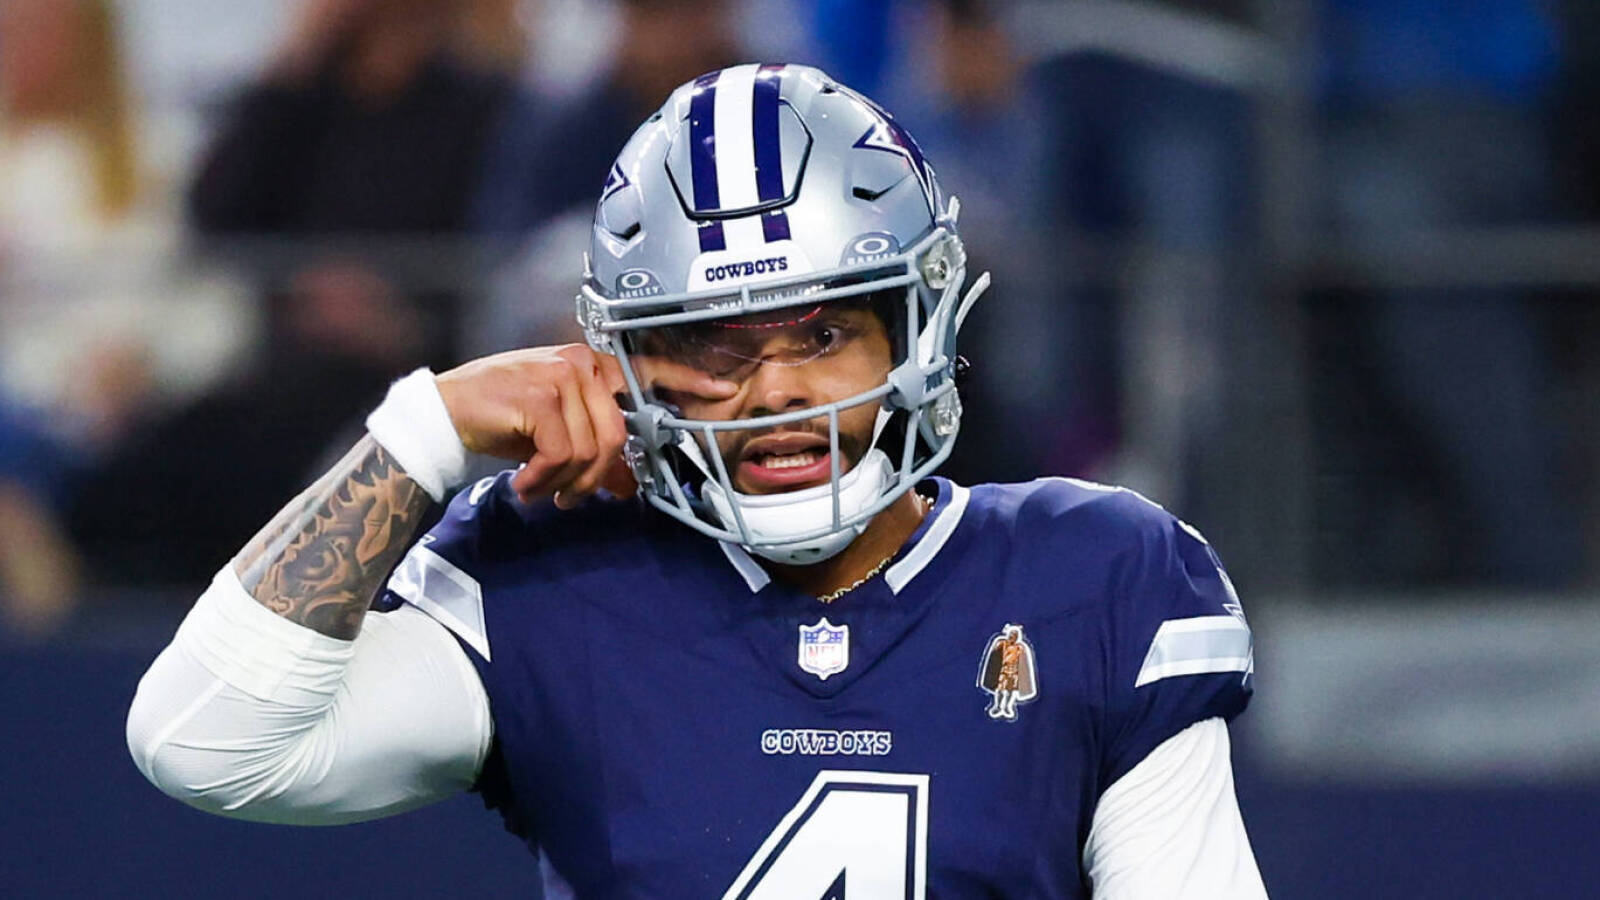 Dak Prescott has telling response to question about contract extension